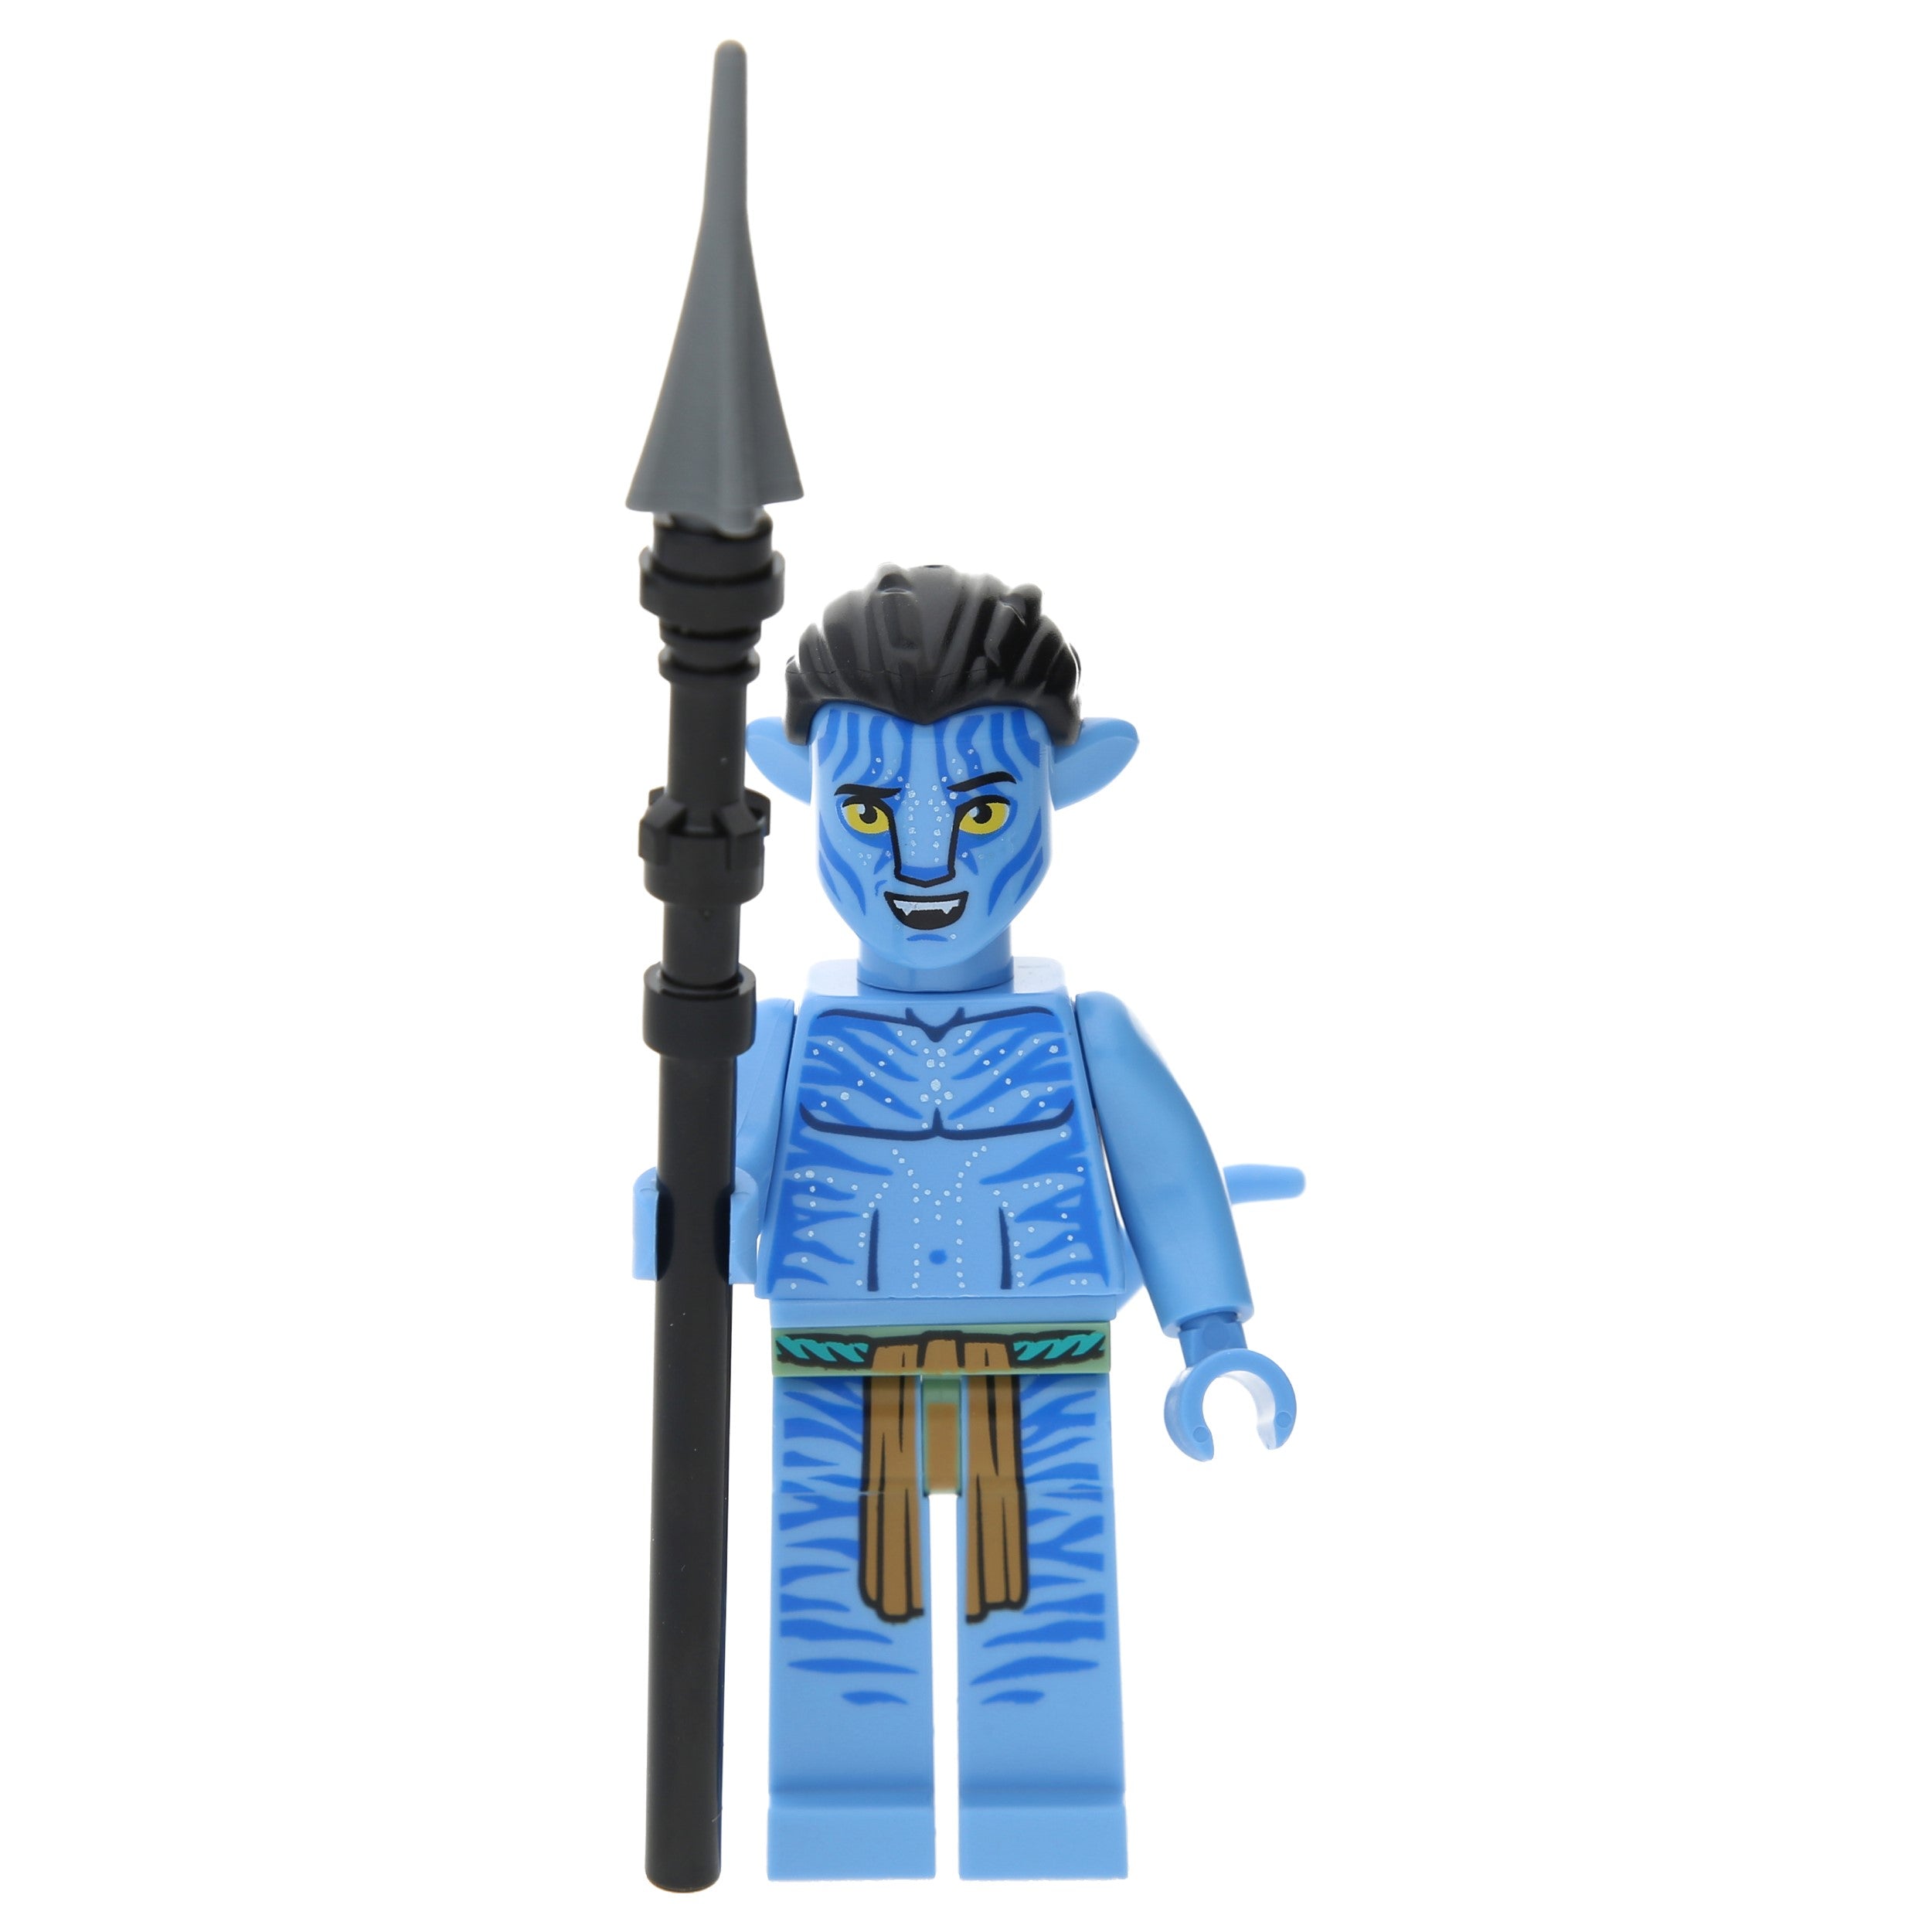 LEGO Avatar Minifigures - Jake Sully with Spear - avt013 - Avatar: The Way of Water